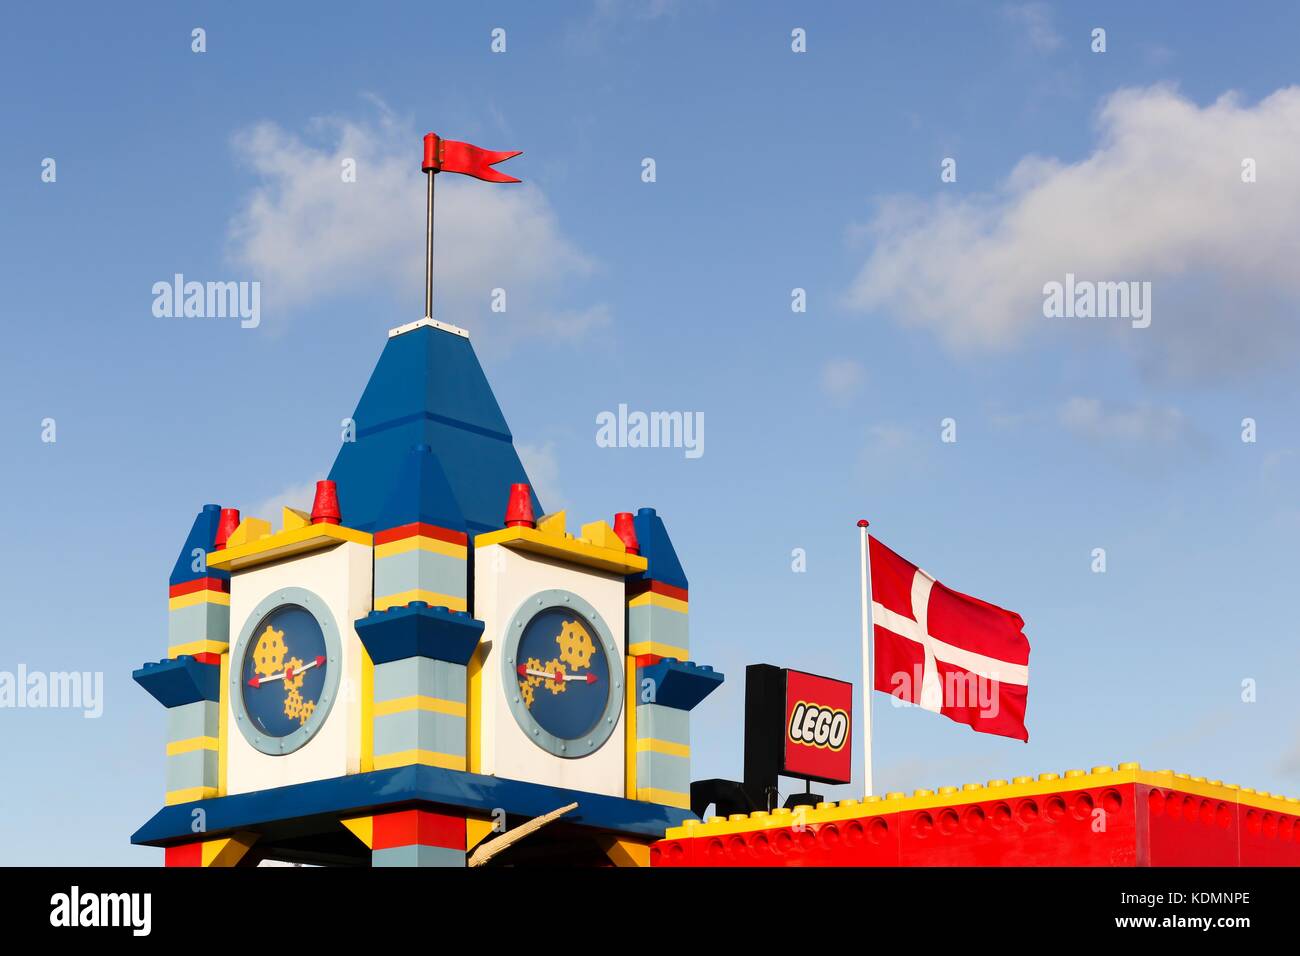 Billund, Denmark - November 12, 2015: Legoland hotel in billund. Lego is a line of plastic construction toys that are manufactured by the danish Lego Stock Photo